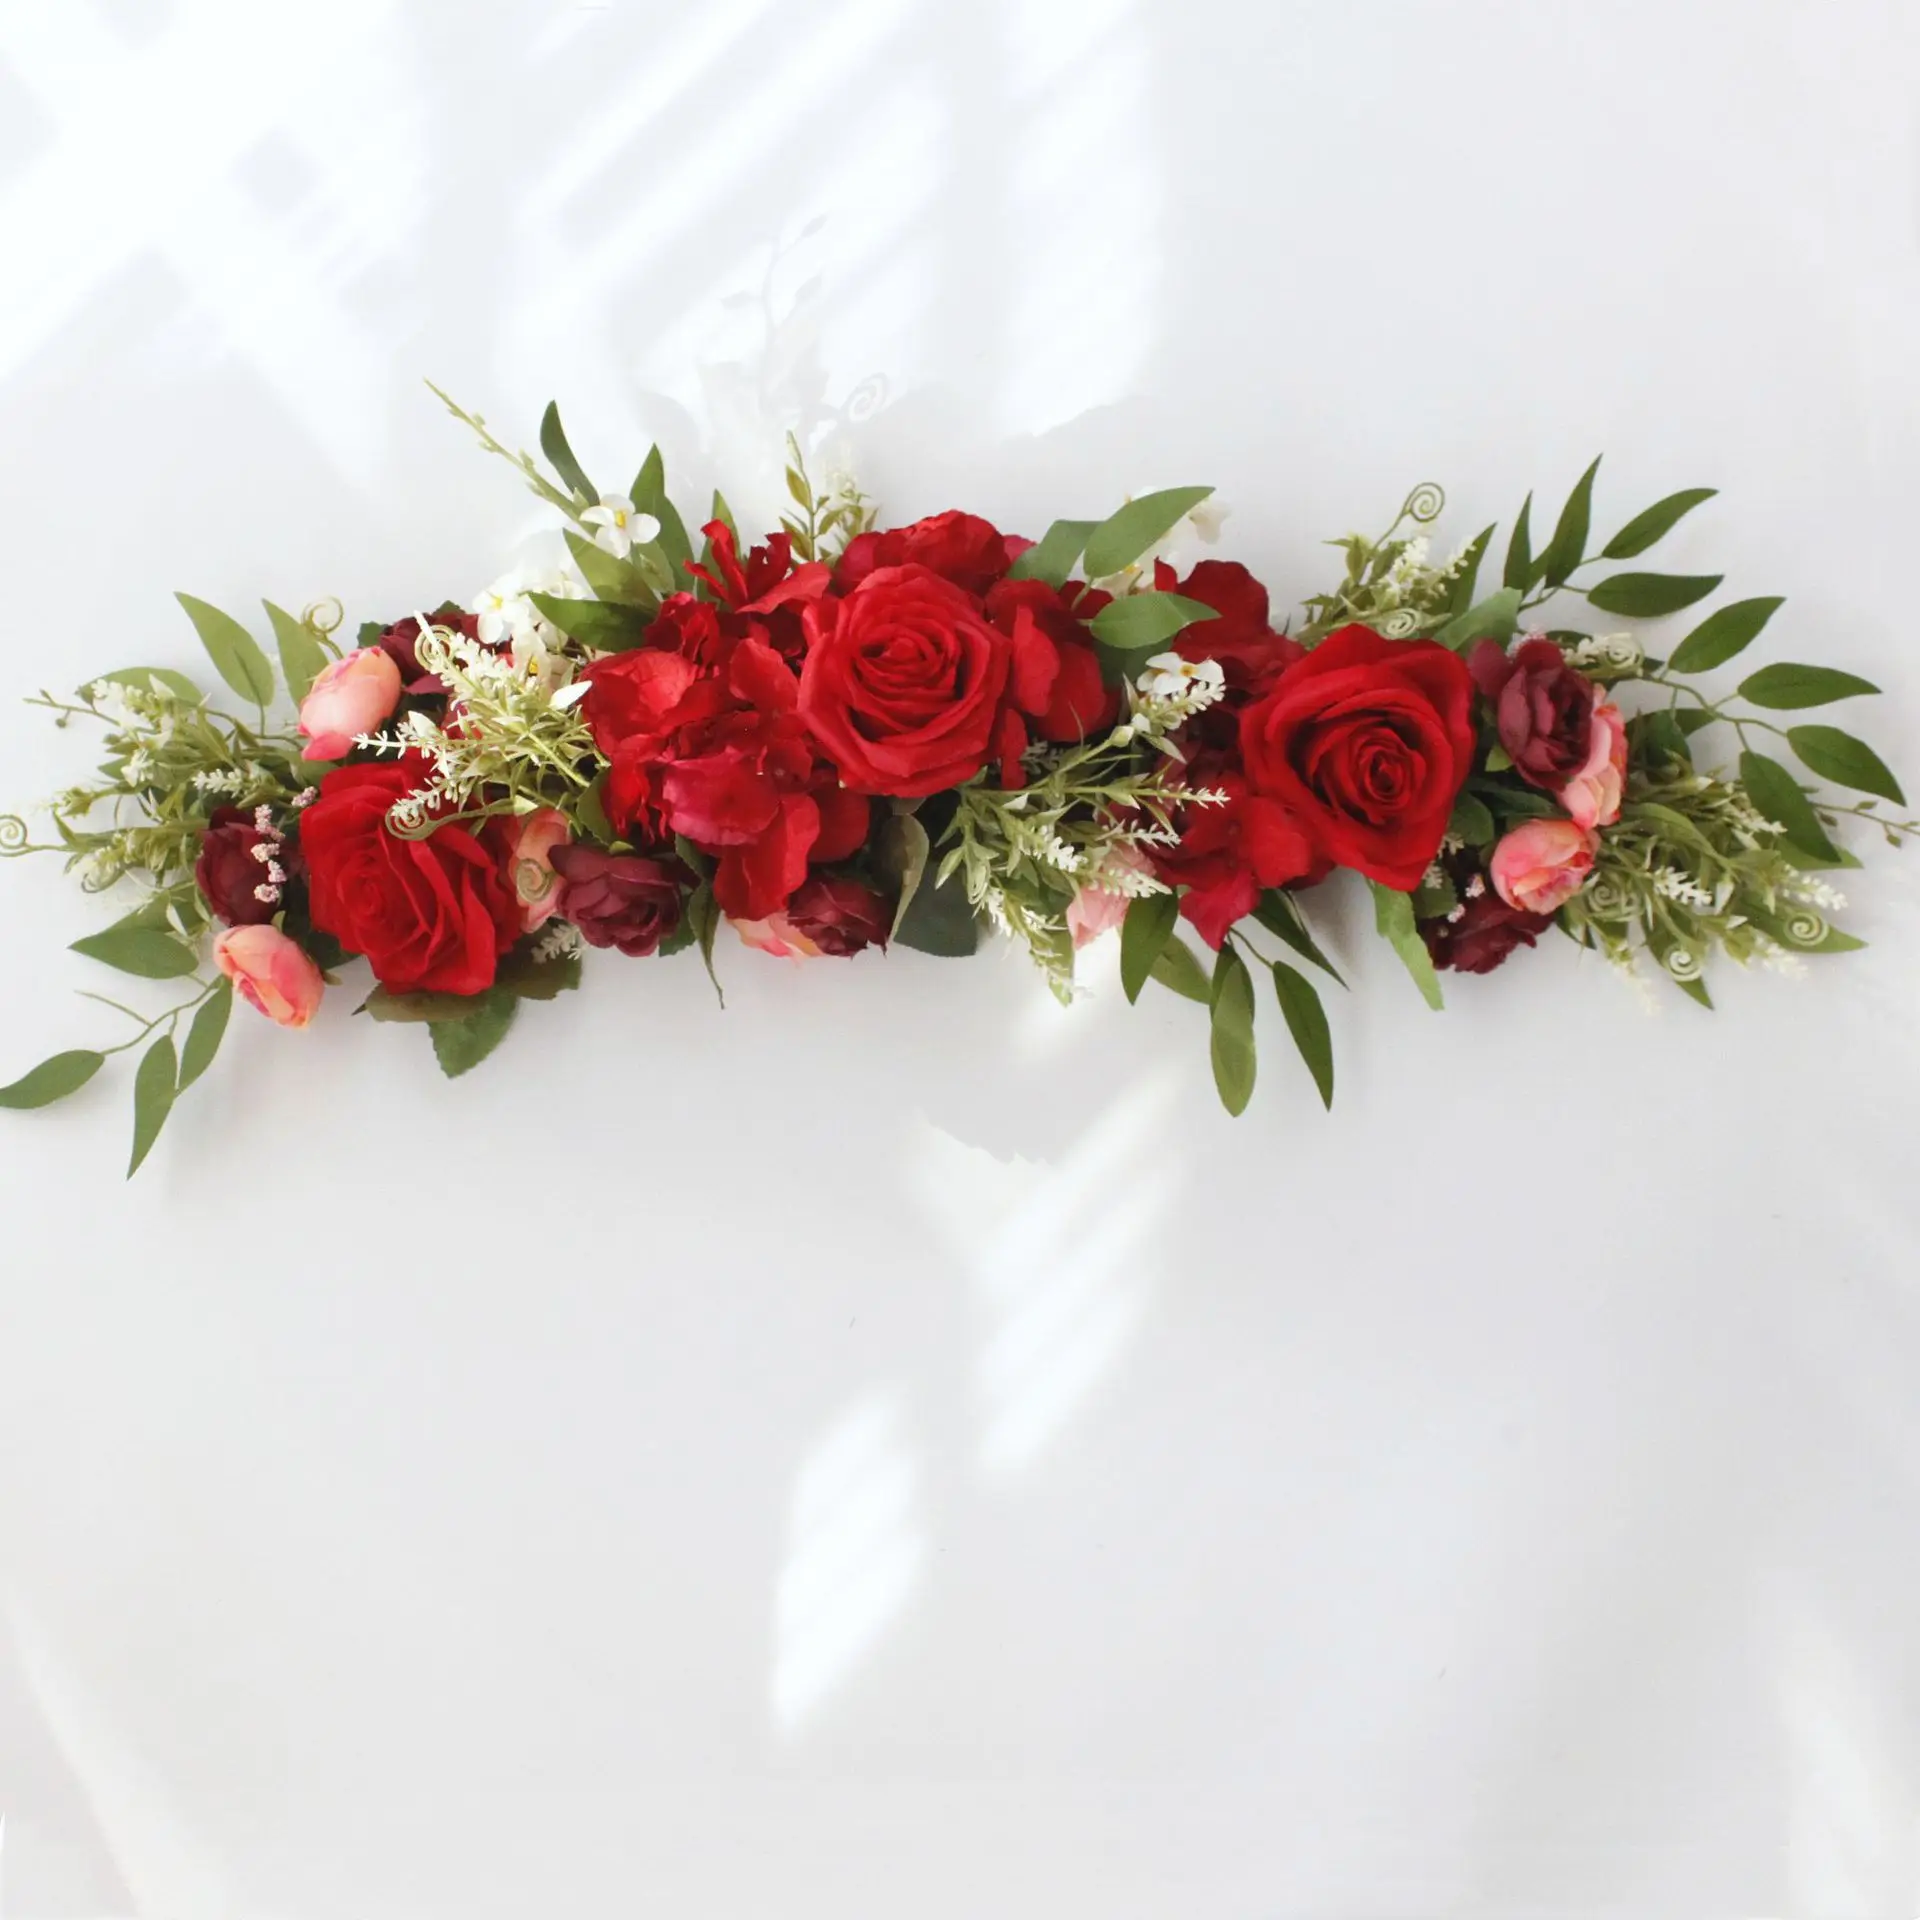 

Artificial Flower Wreath Door Threshold Diy Wedding Decor Home Party Rose Floral Wall Christmas Garland Gift Rose Peony Plants